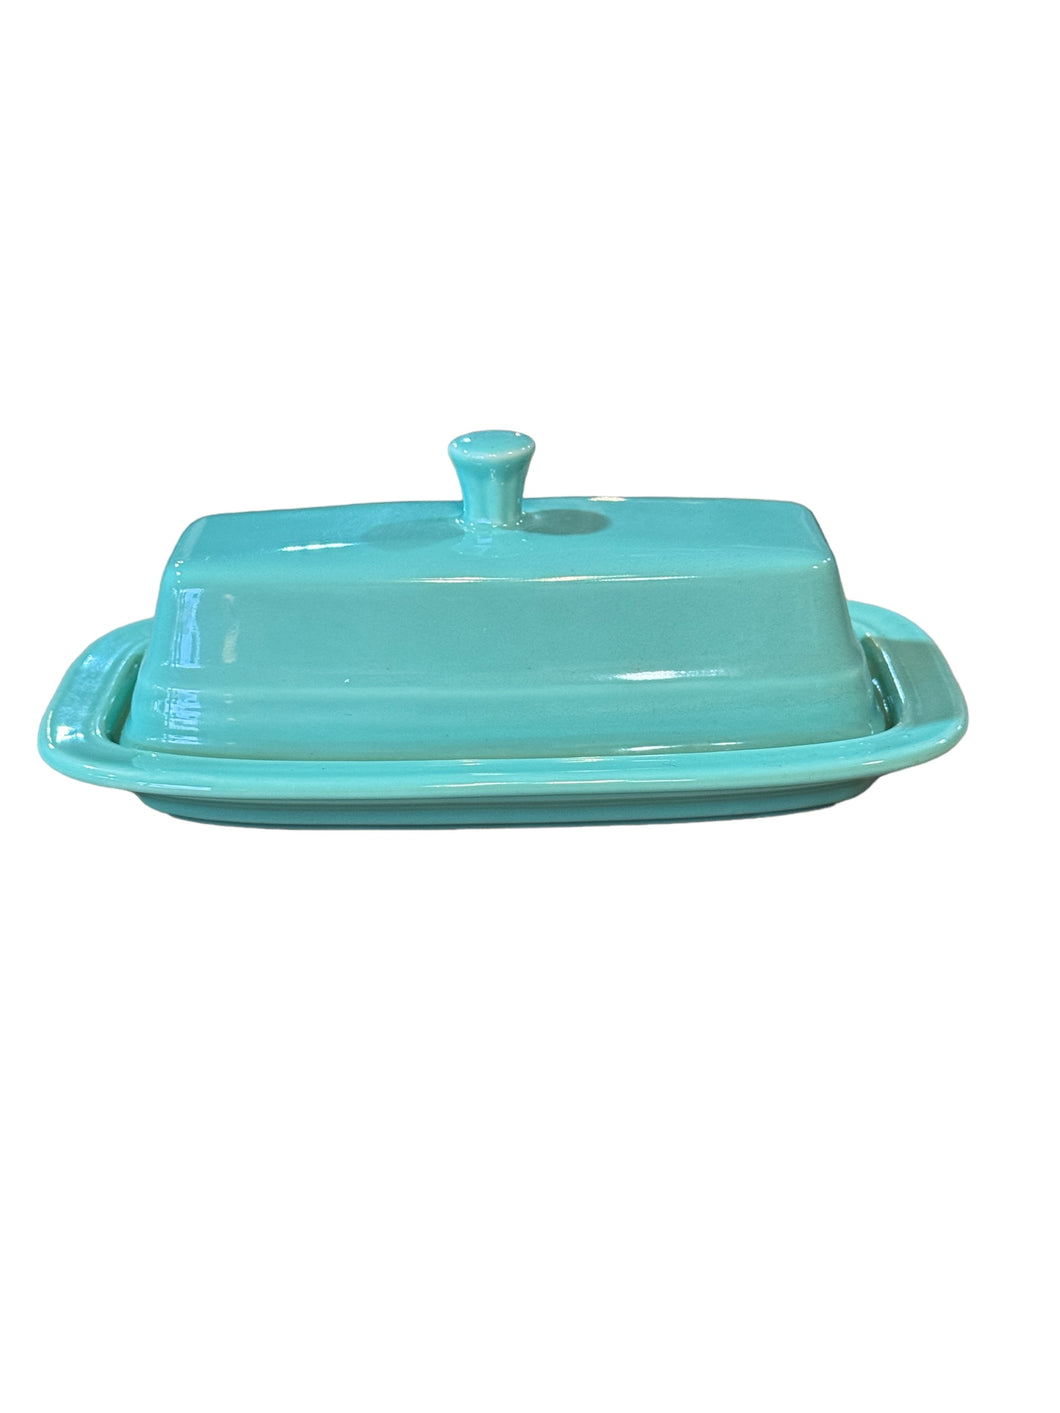 Fiesta Retired Size Butter Dish Smaller size Retired Color